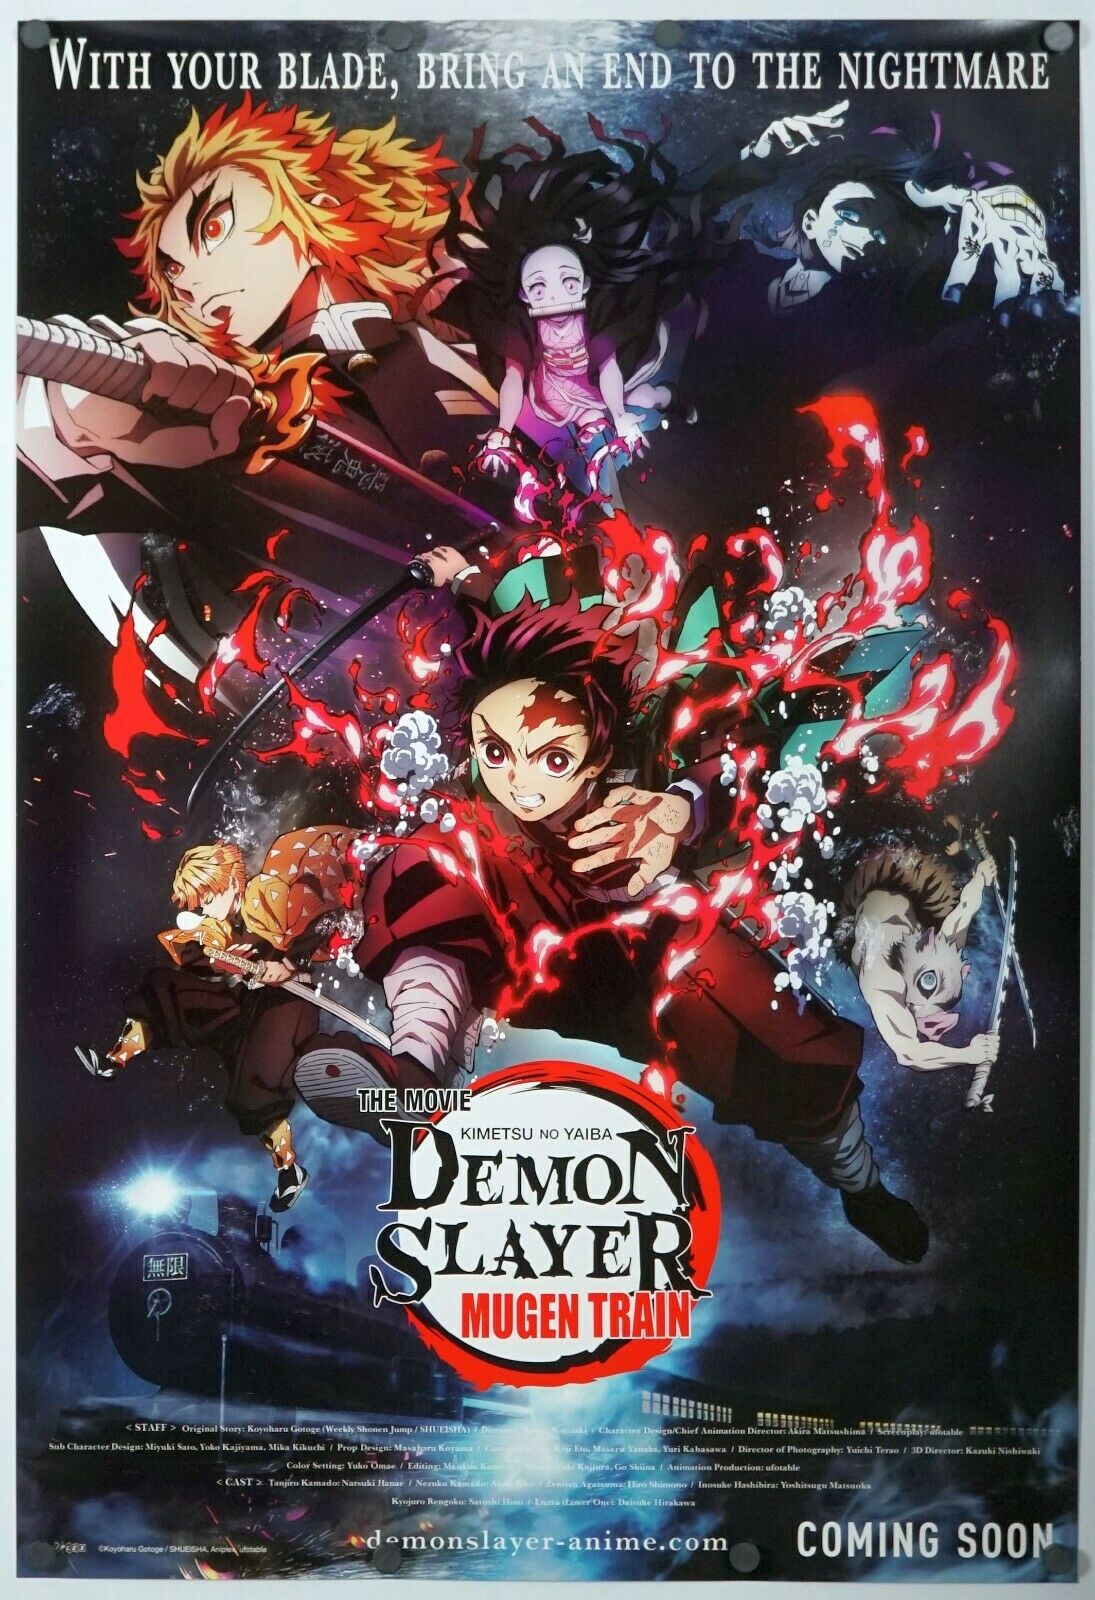 Mugen Train: What to Know About the Demon Slayer Movie